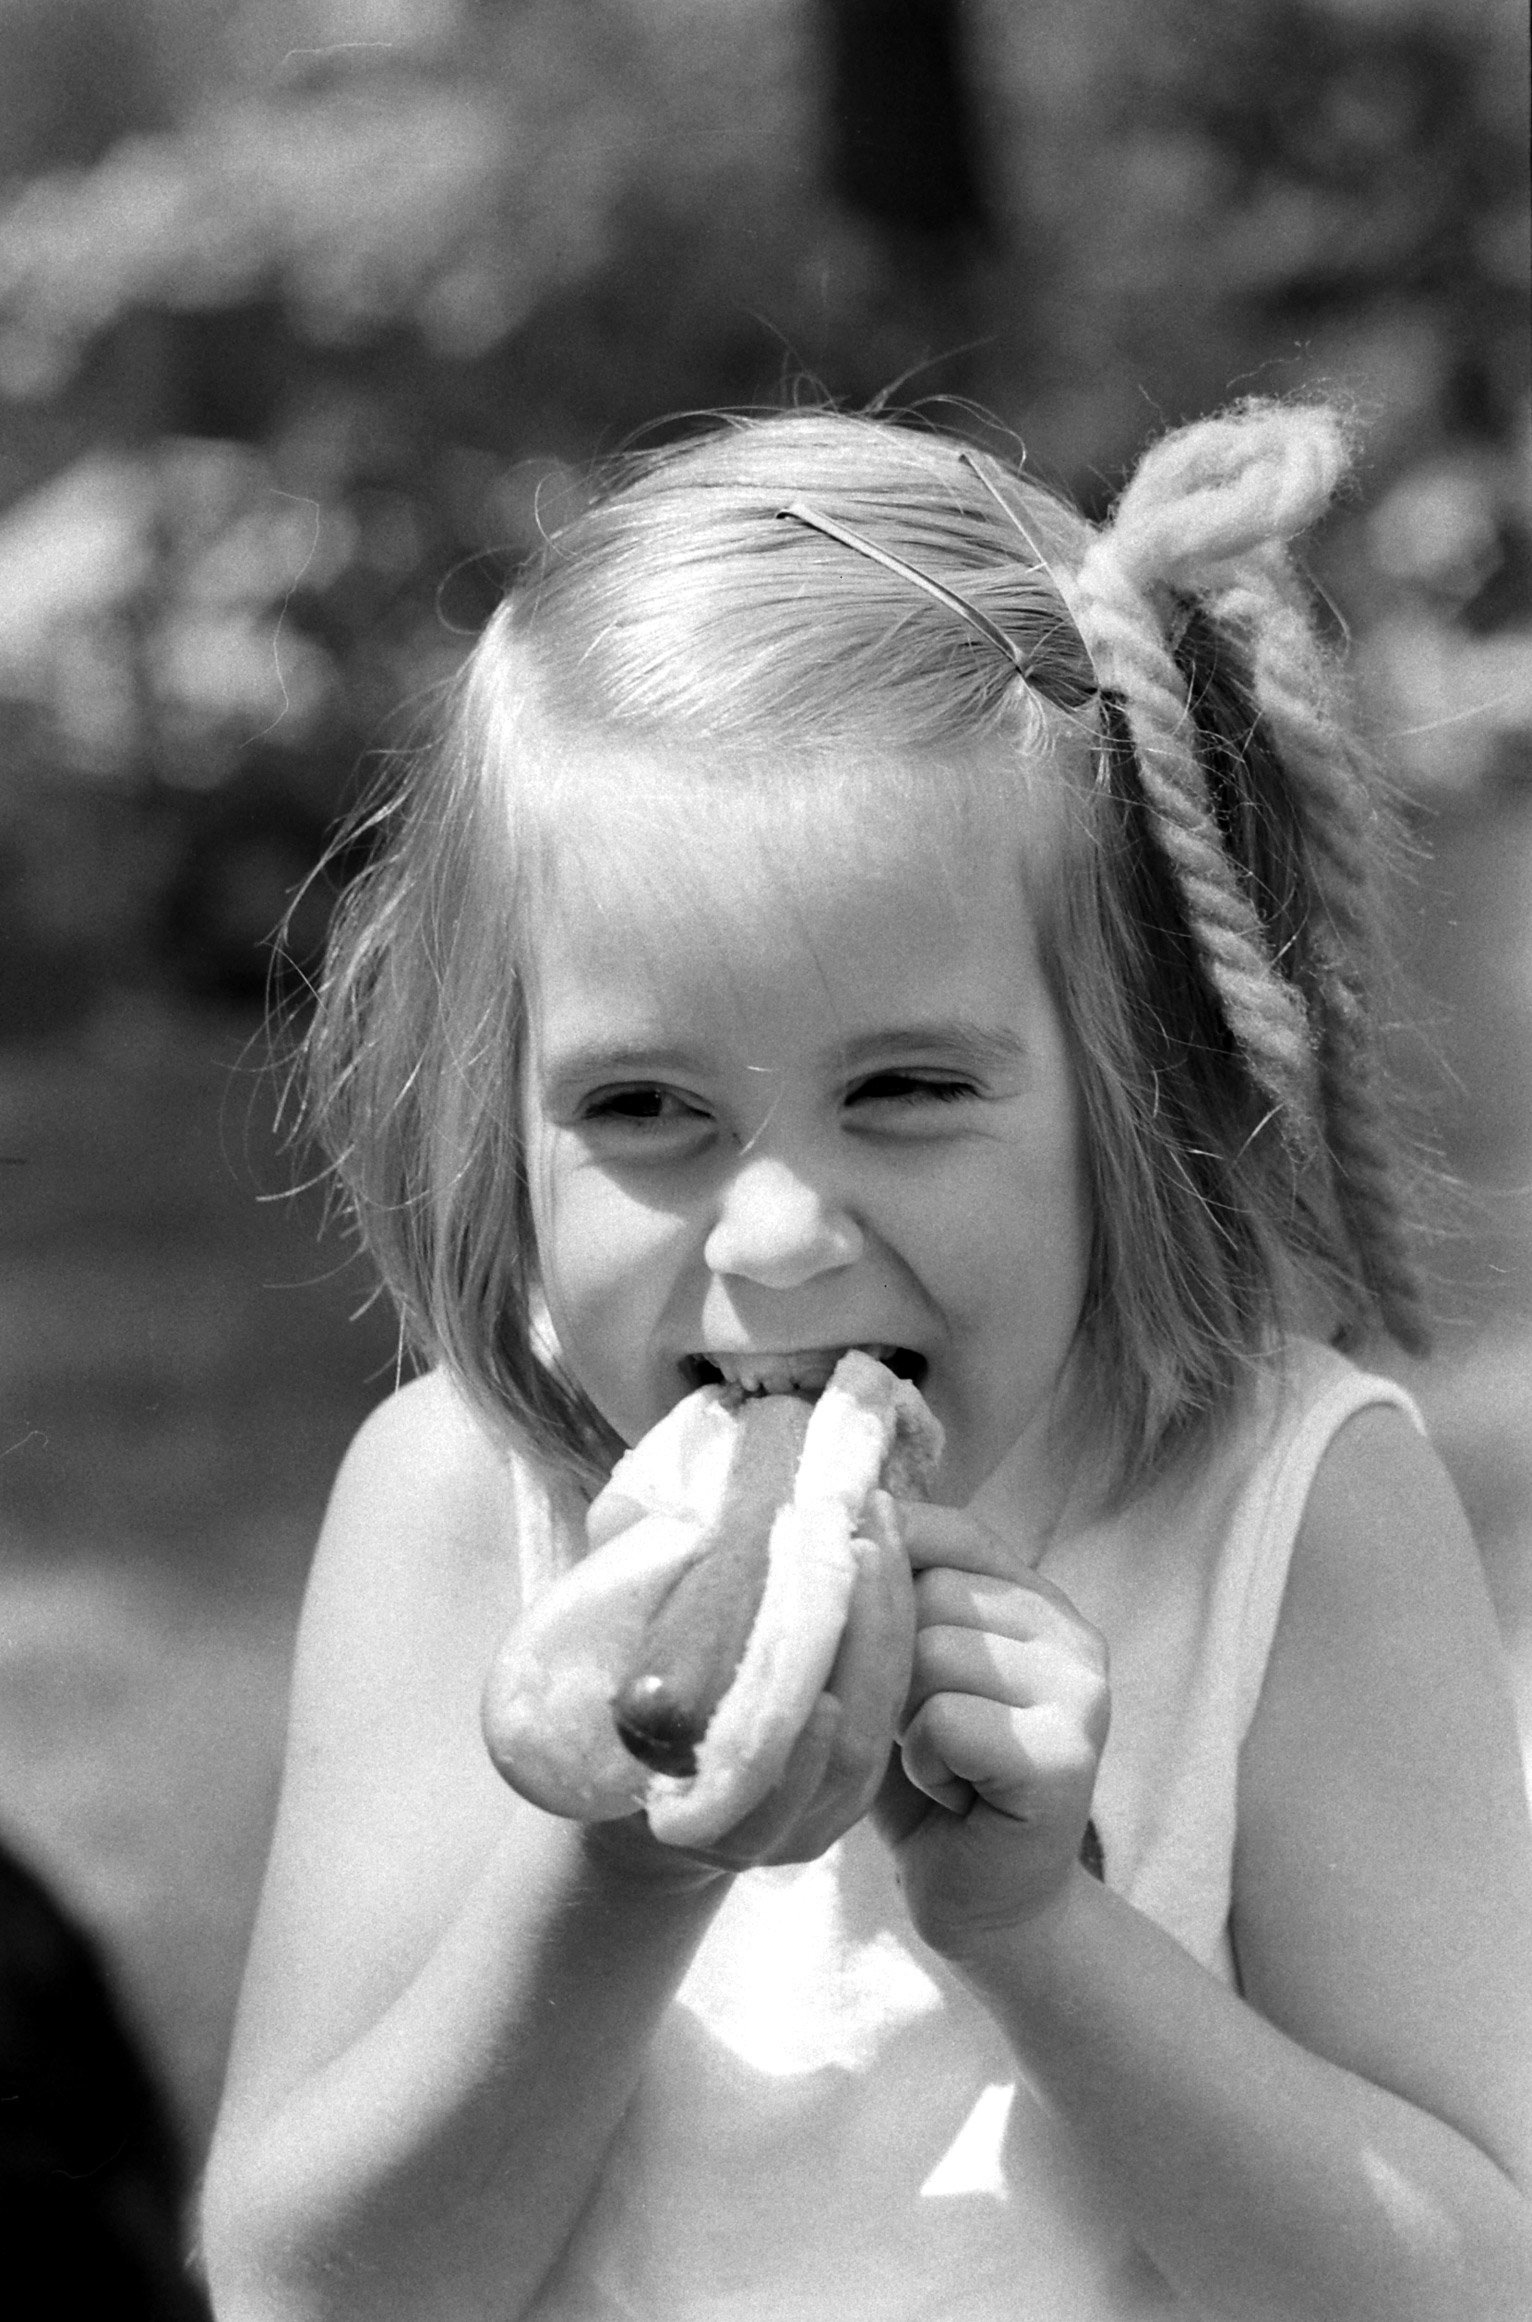 The All-American Hot Dog 1972